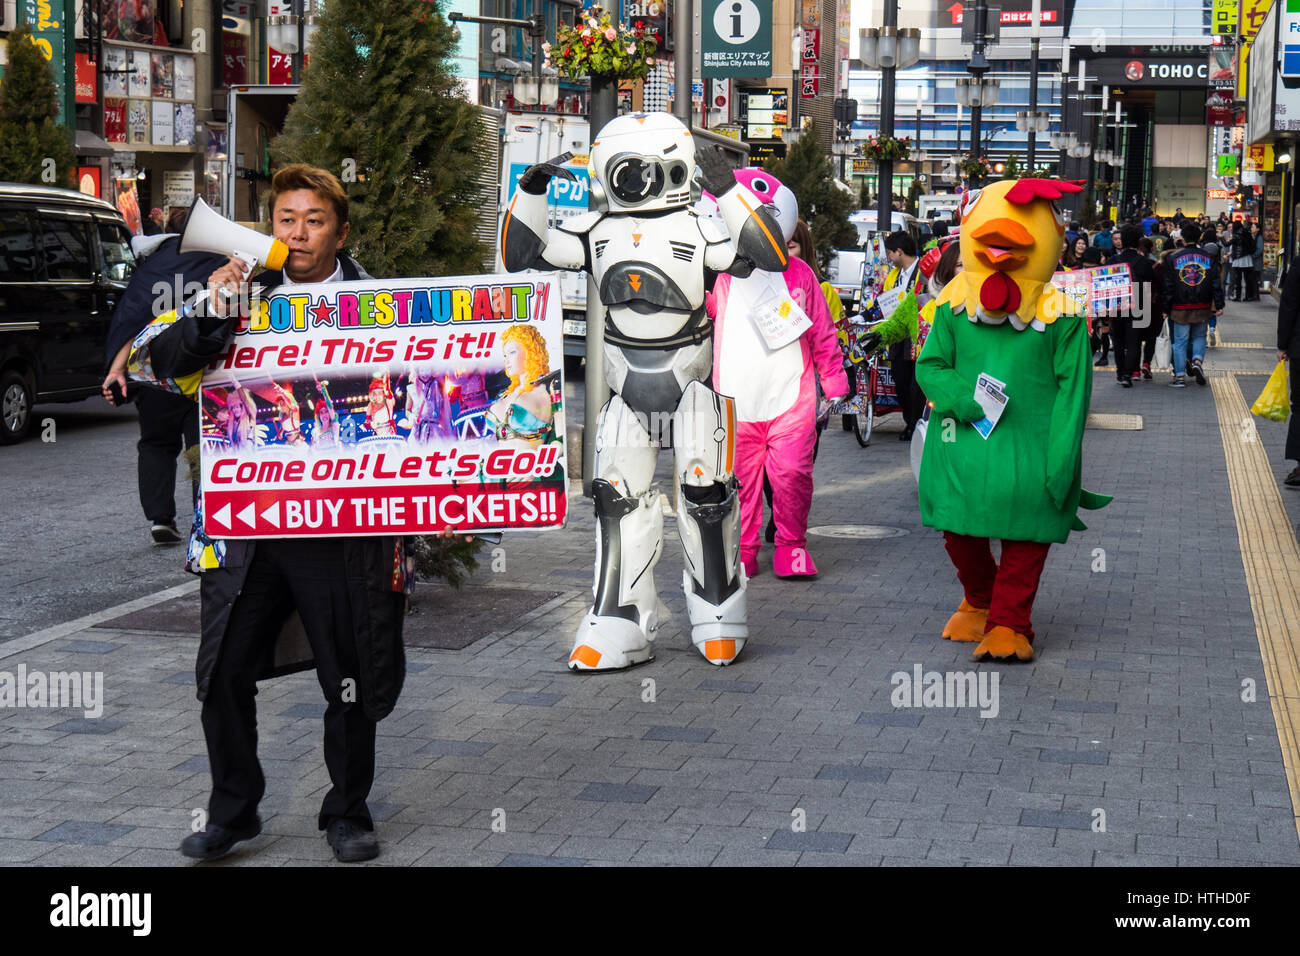 Actors dressed up in mascot suits touting for business for a Robot themed restaurant in Kabukicho Shinjuku Tokyo Japan Stock Photo